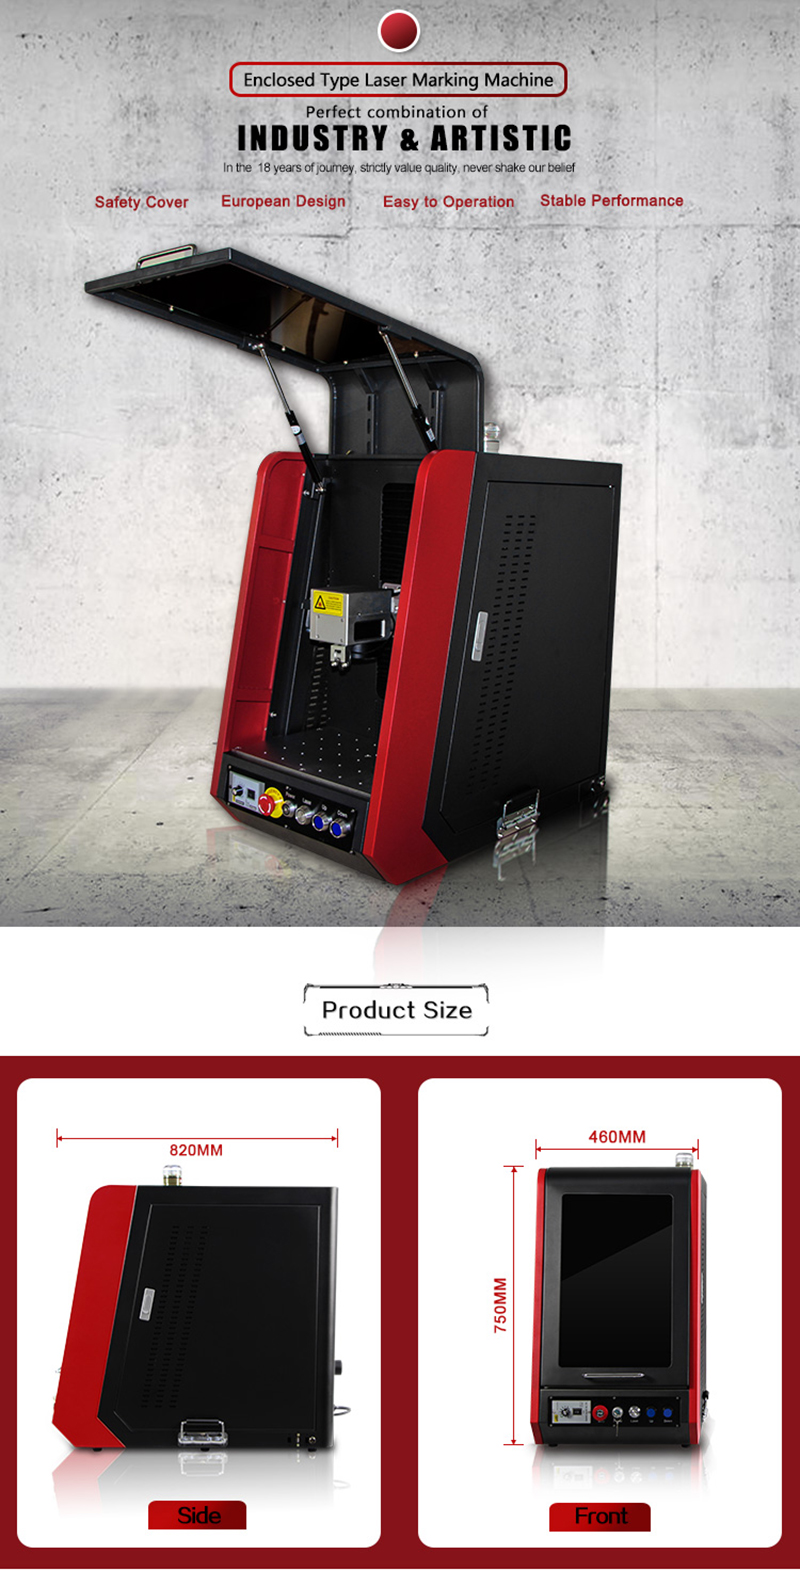 20W 30W 50W JPT color mopa metal fiber laser marking machine for jewelry rubber plastic with rotary